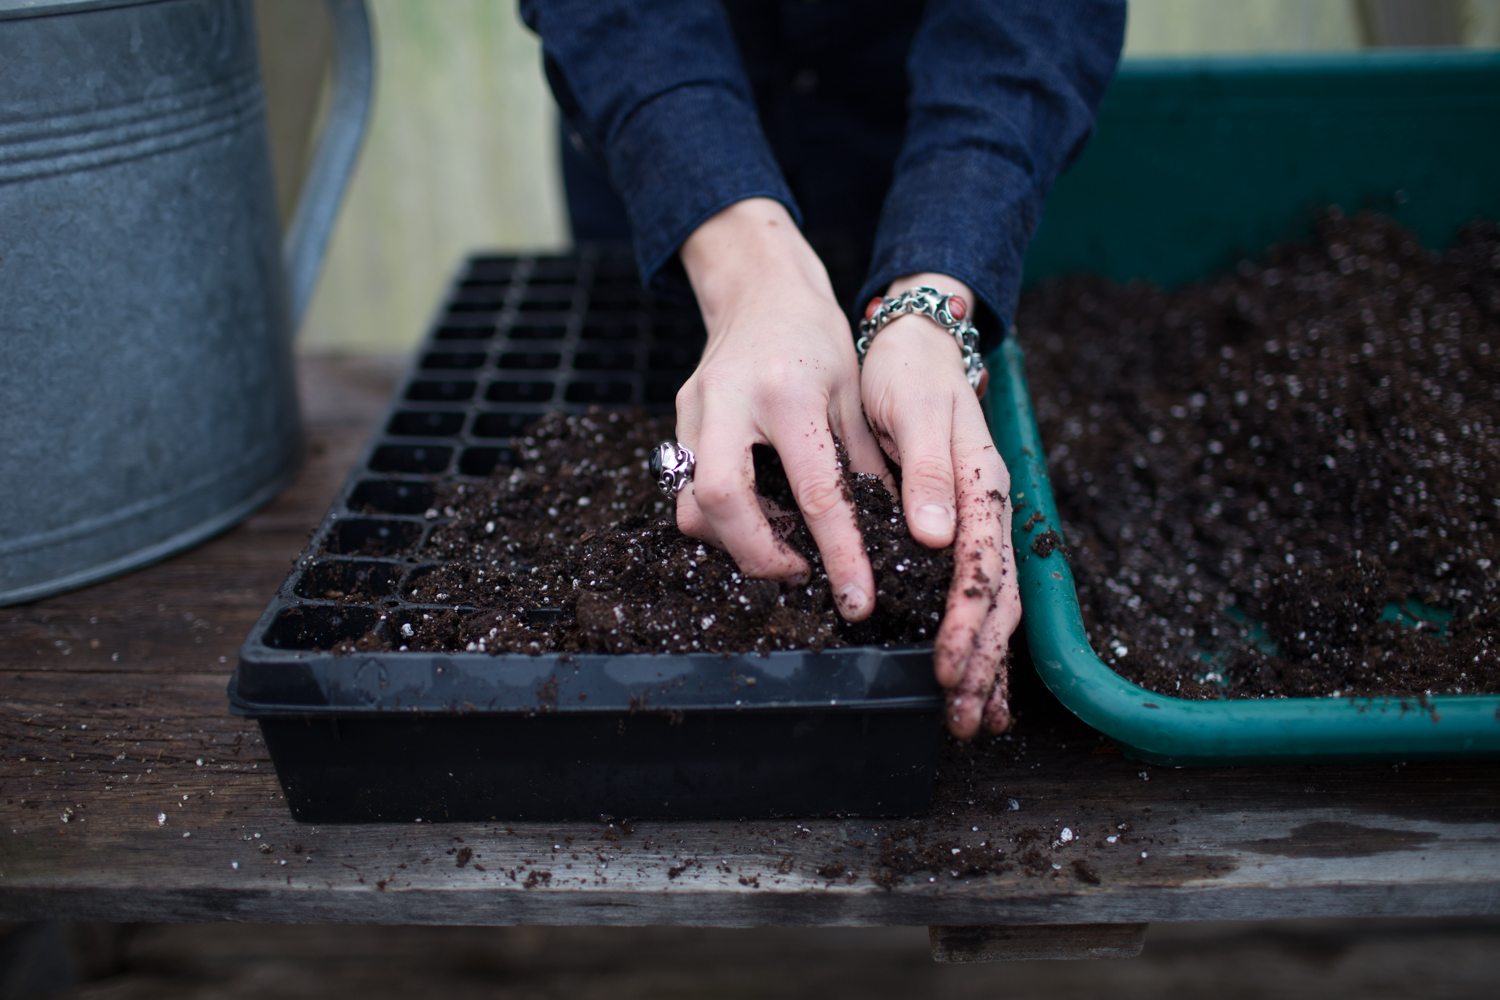 Packing soil into a seed tray